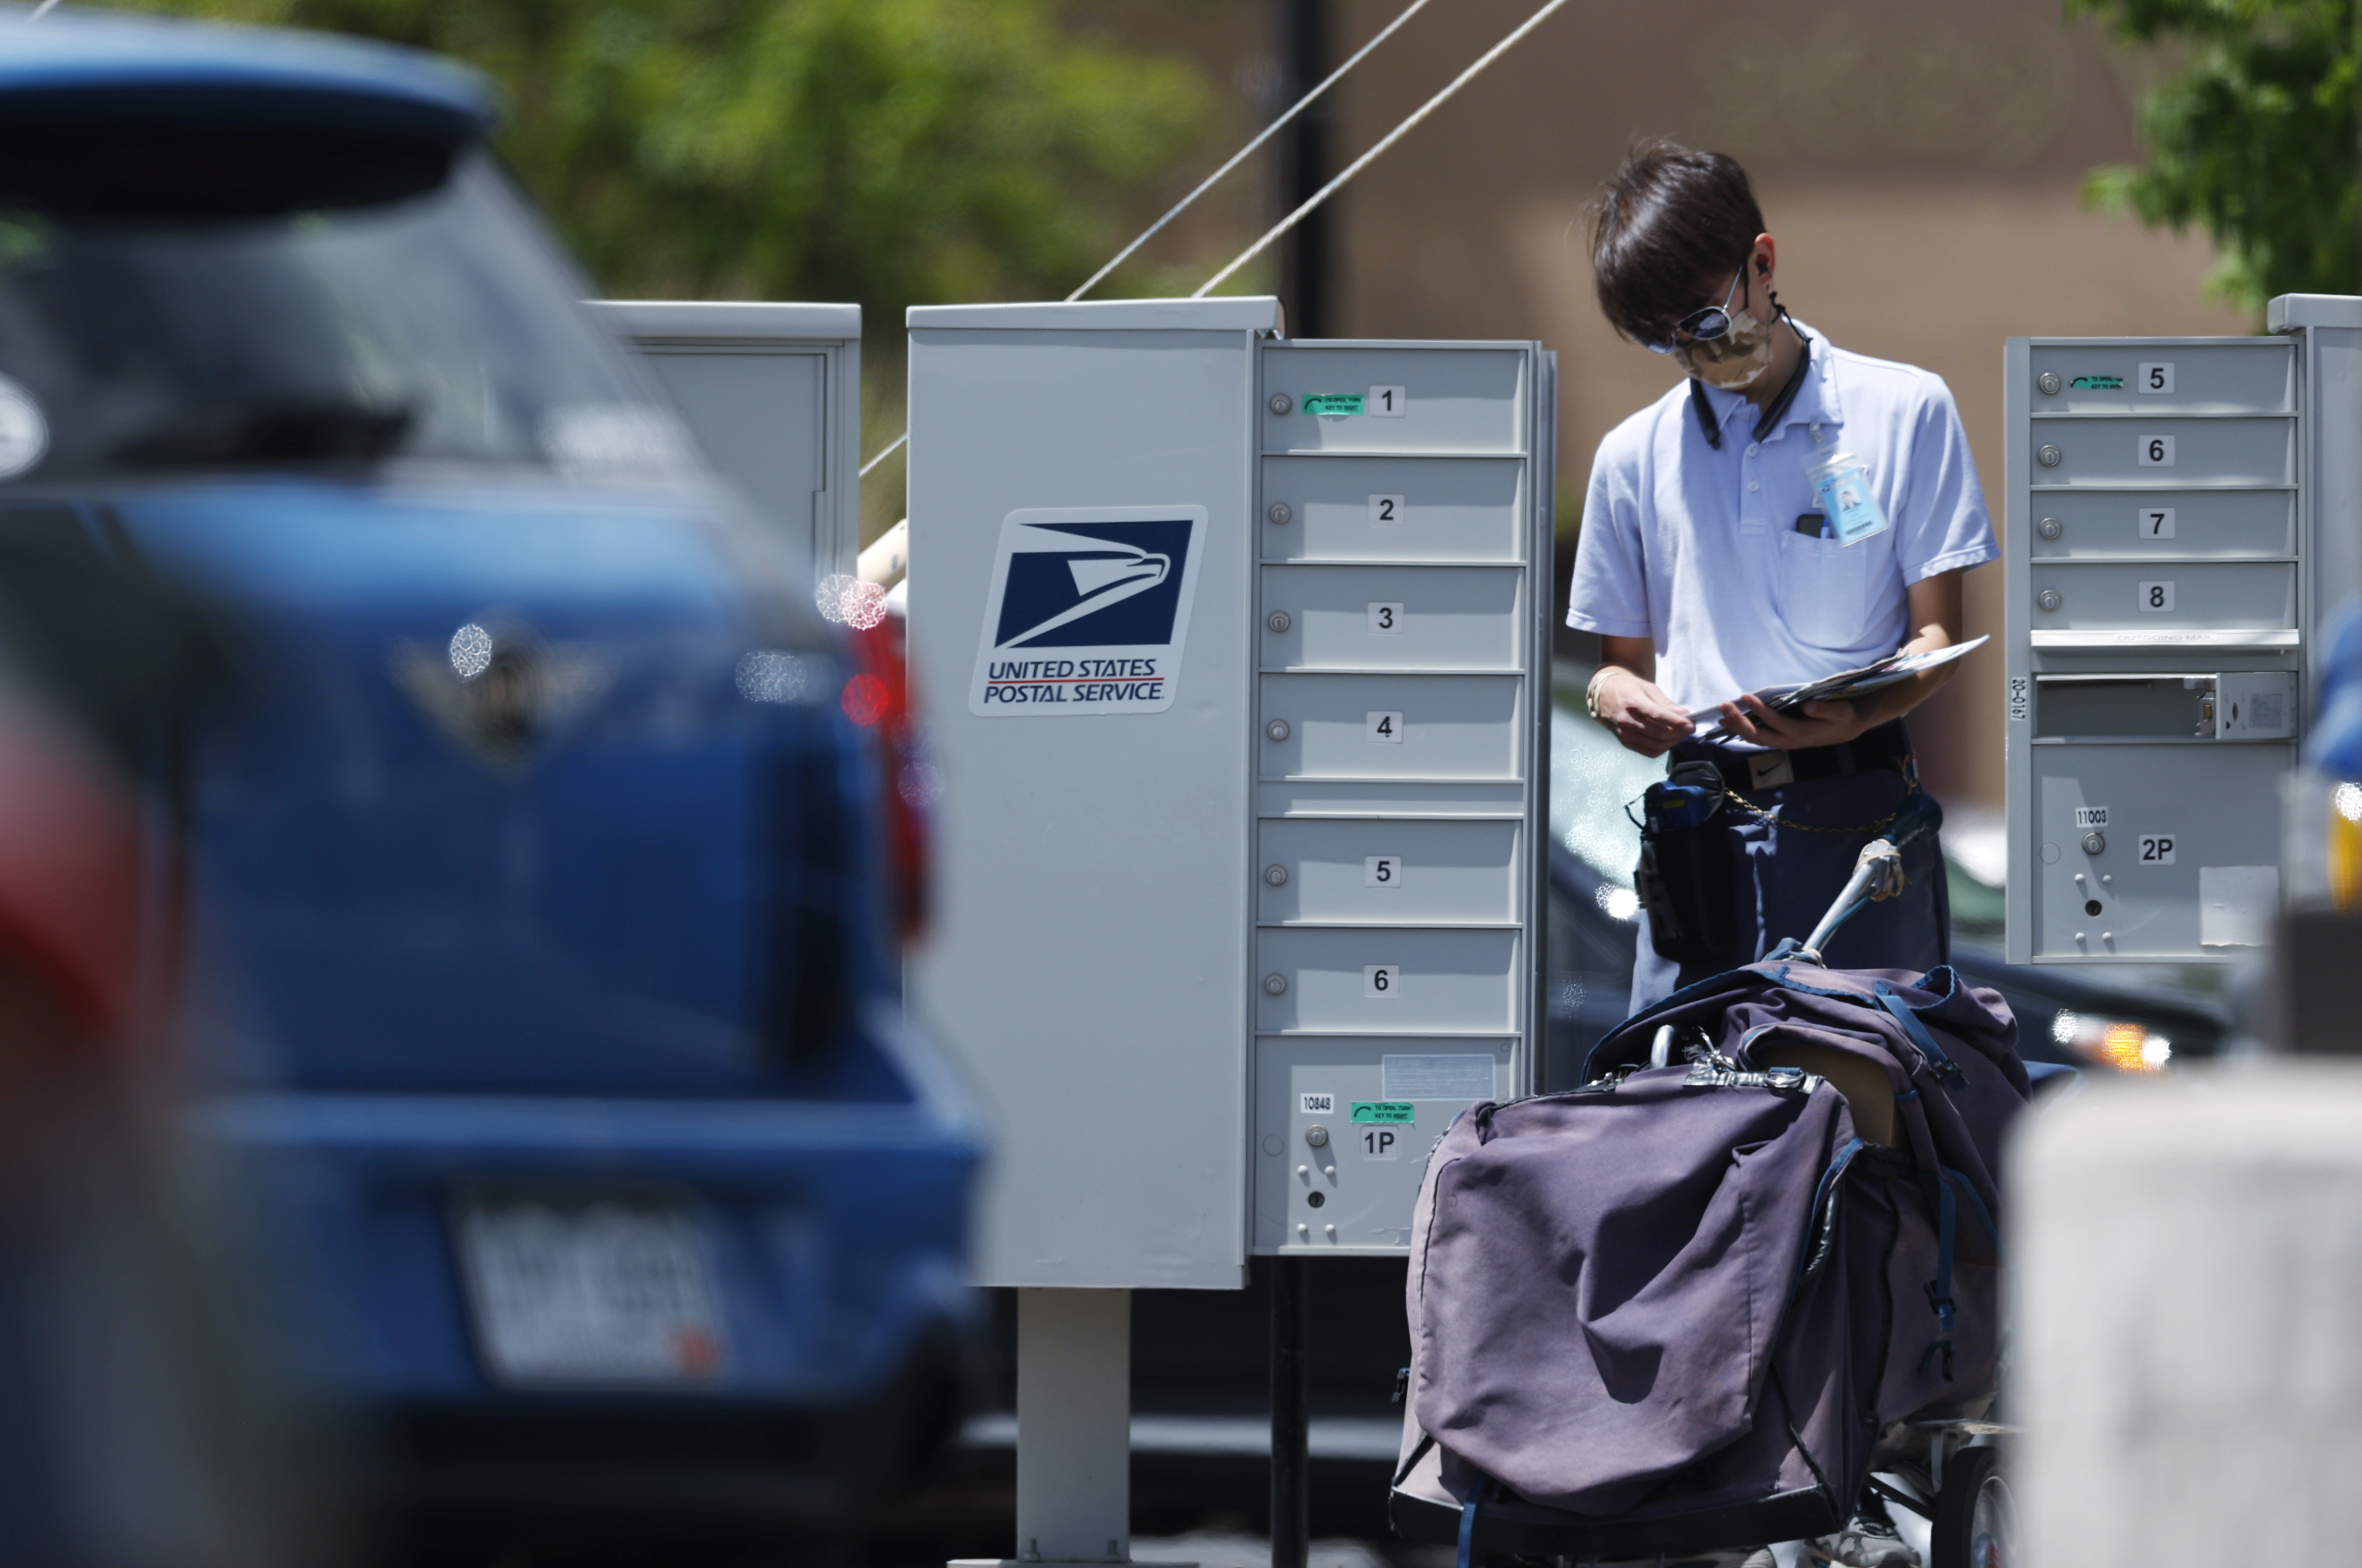 USPS wants to raise the price of a first-class postage stamp to 66 cents